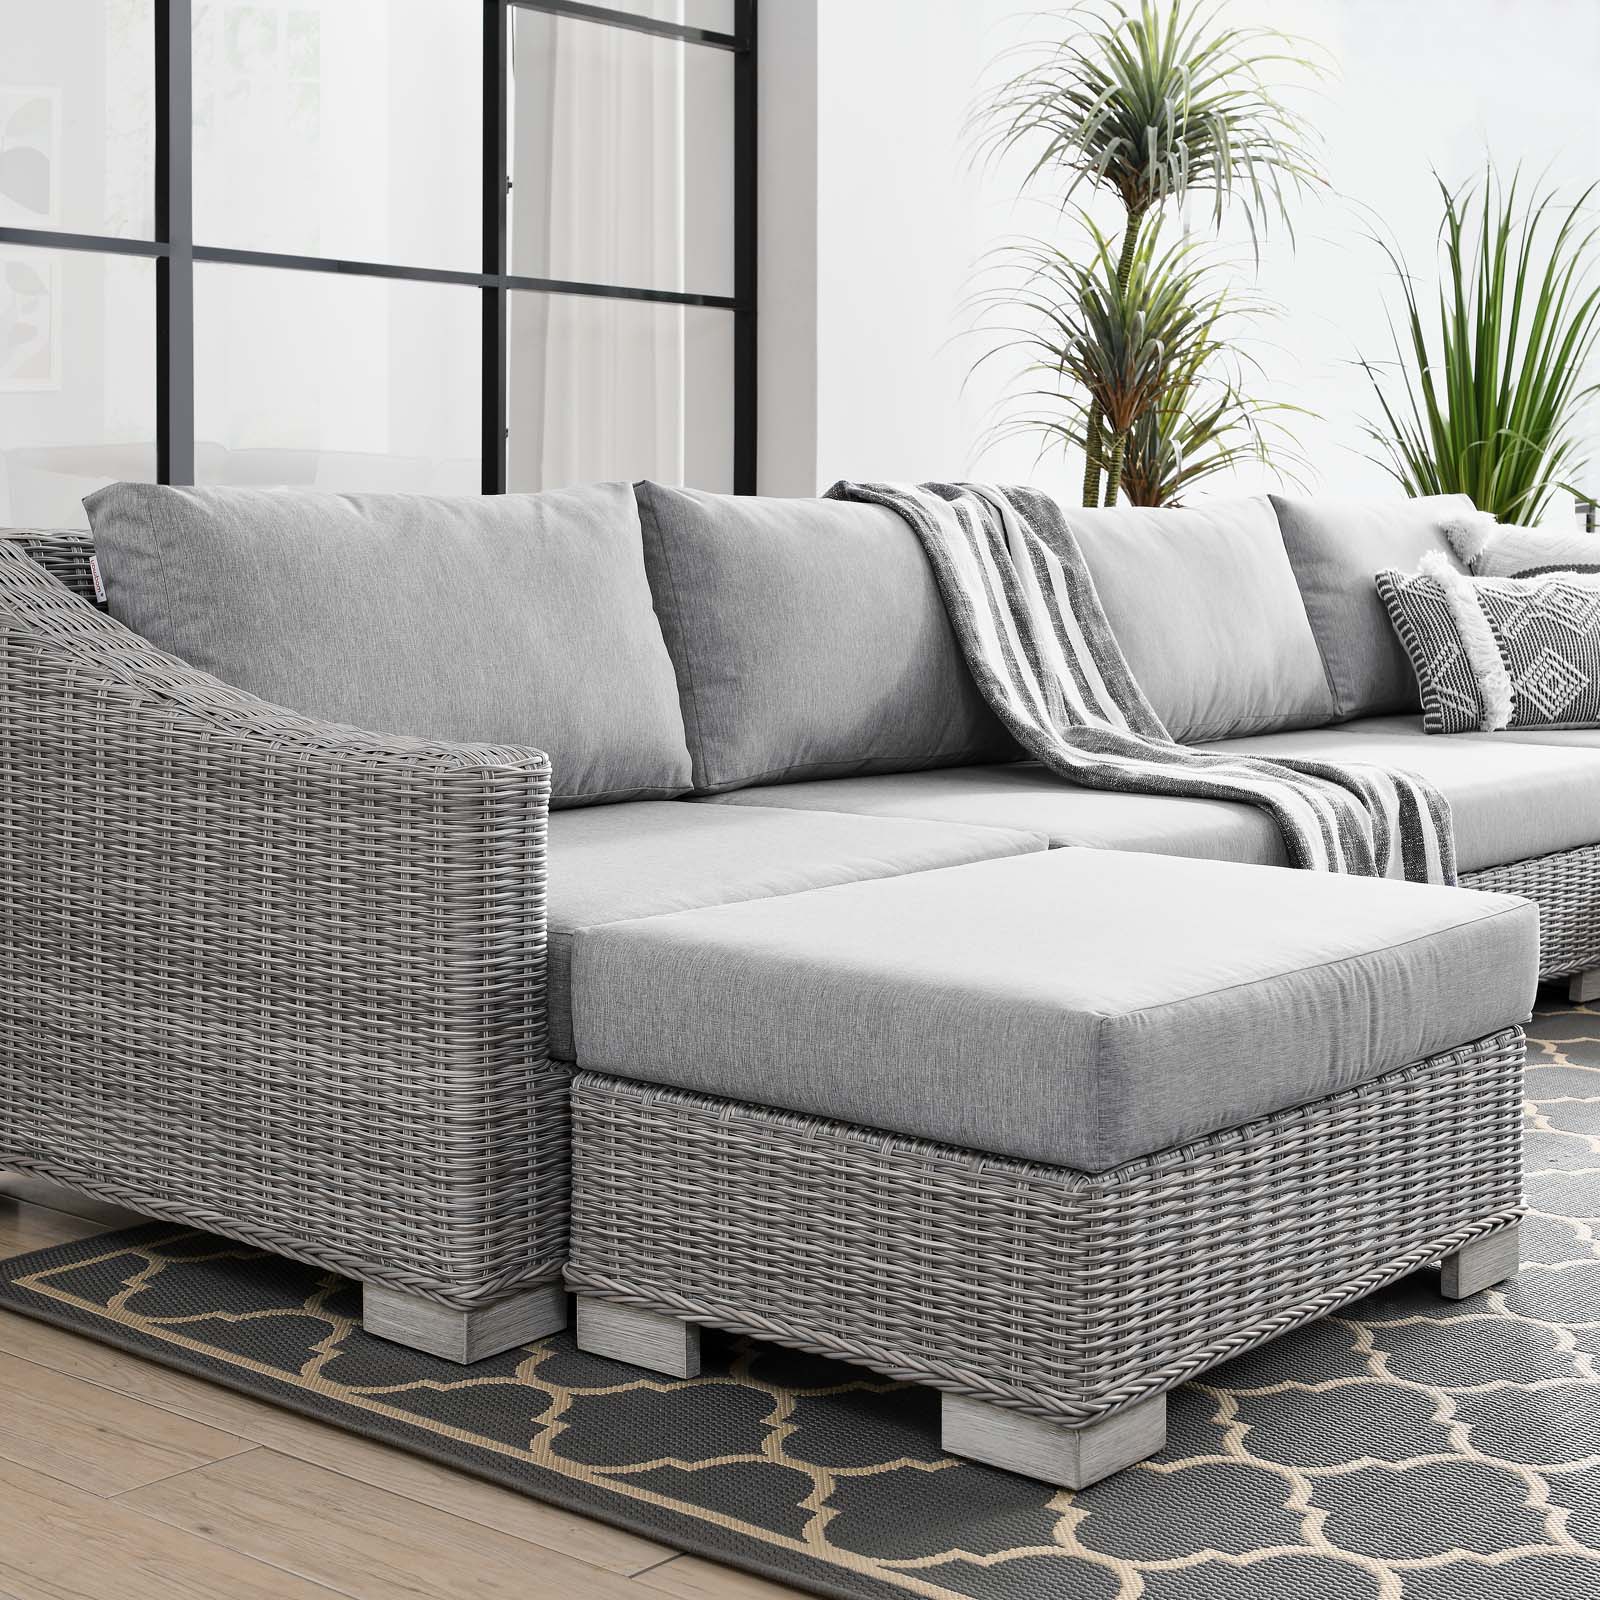 Lounge Sectional Sofa Chair Set, Rattan, Wicker, Grey Gray, Modern Contemporary Urban Design, Outdoor Patio Balcony Cafe Bistro Garden Furniture Hotel Hospitality - image 5 of 10